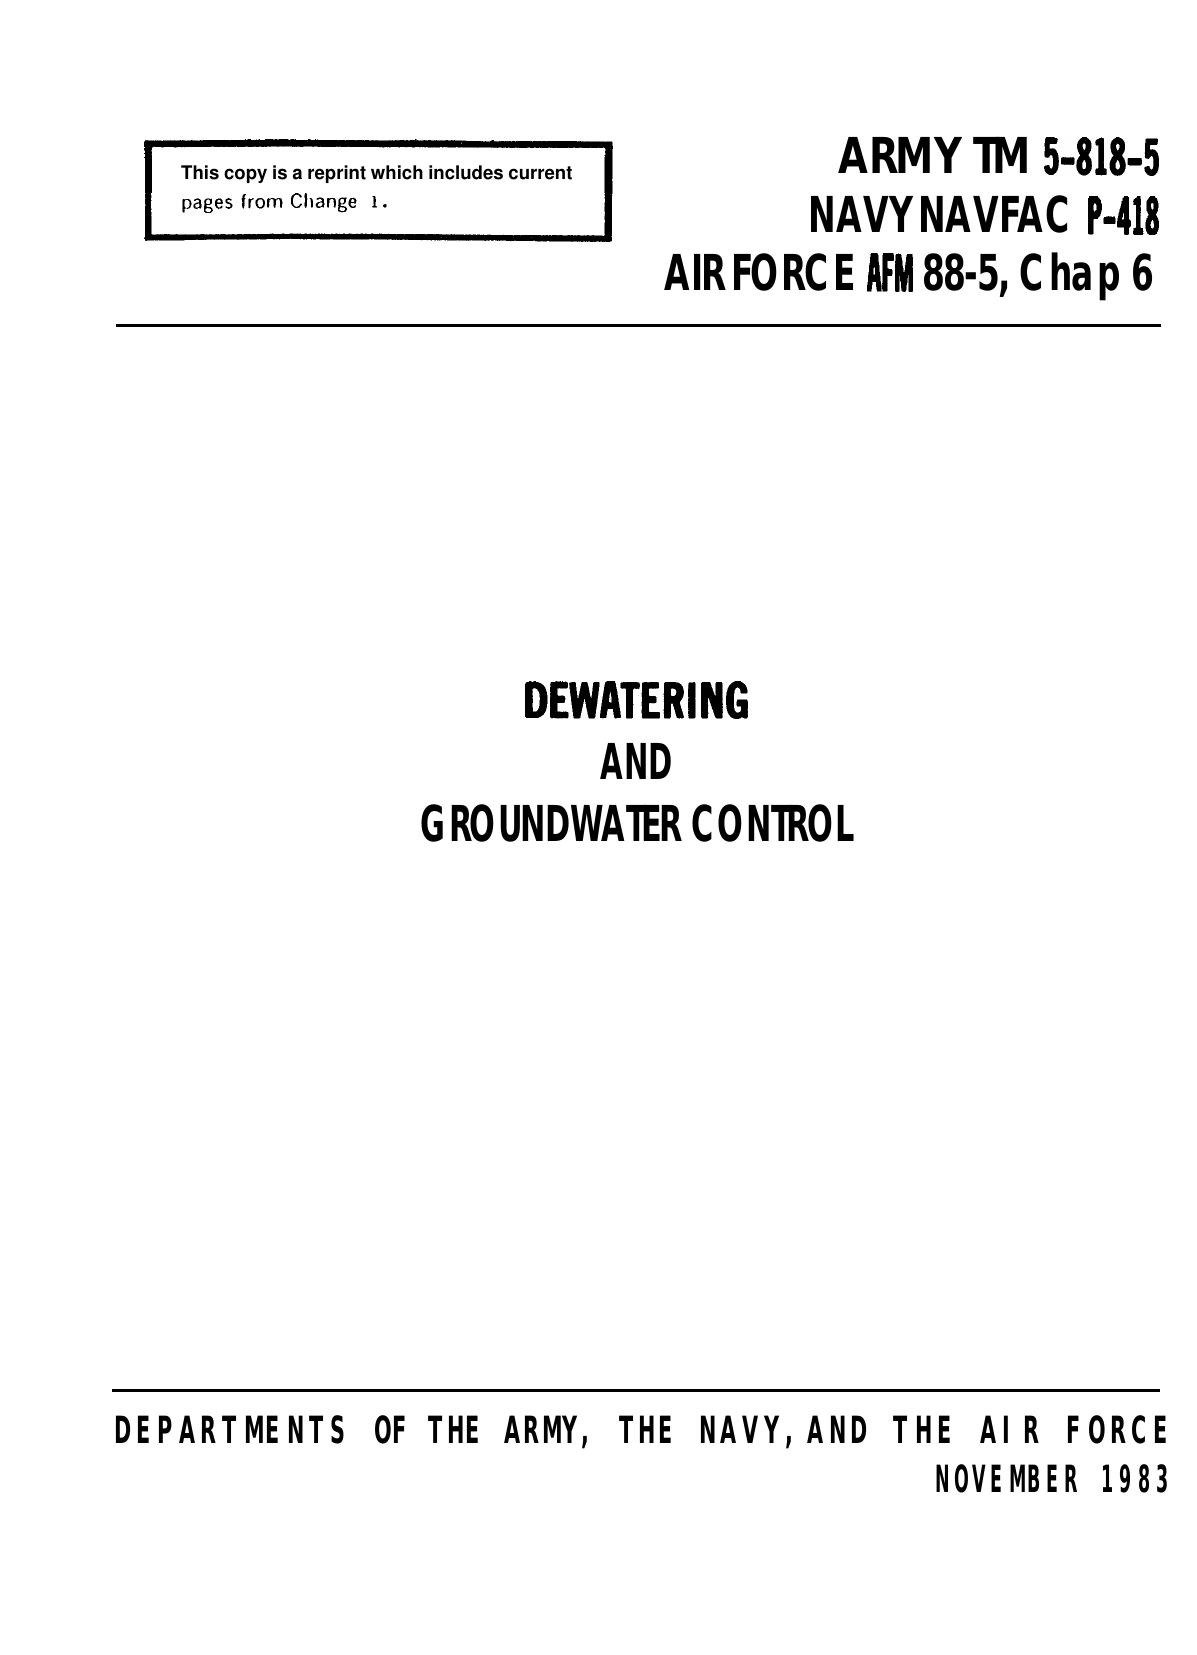 dewatering and groundwater control